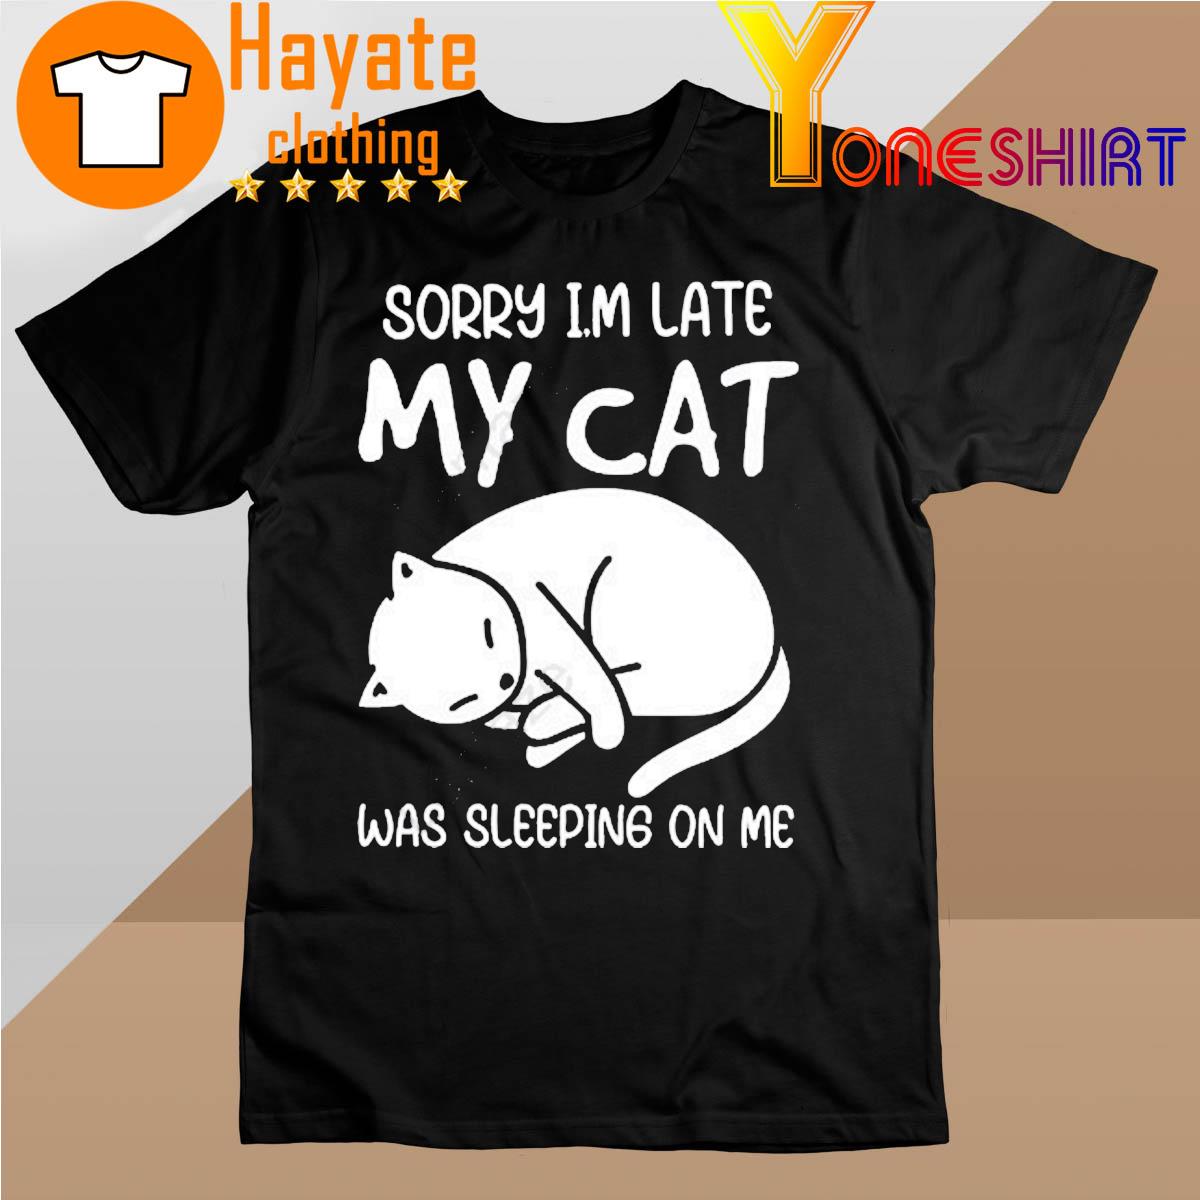 Sorry I’m Late My Cat Was Sleeping On Me Shirtsorry I’m Late My Cat Was Sleeping On Me Black shirt